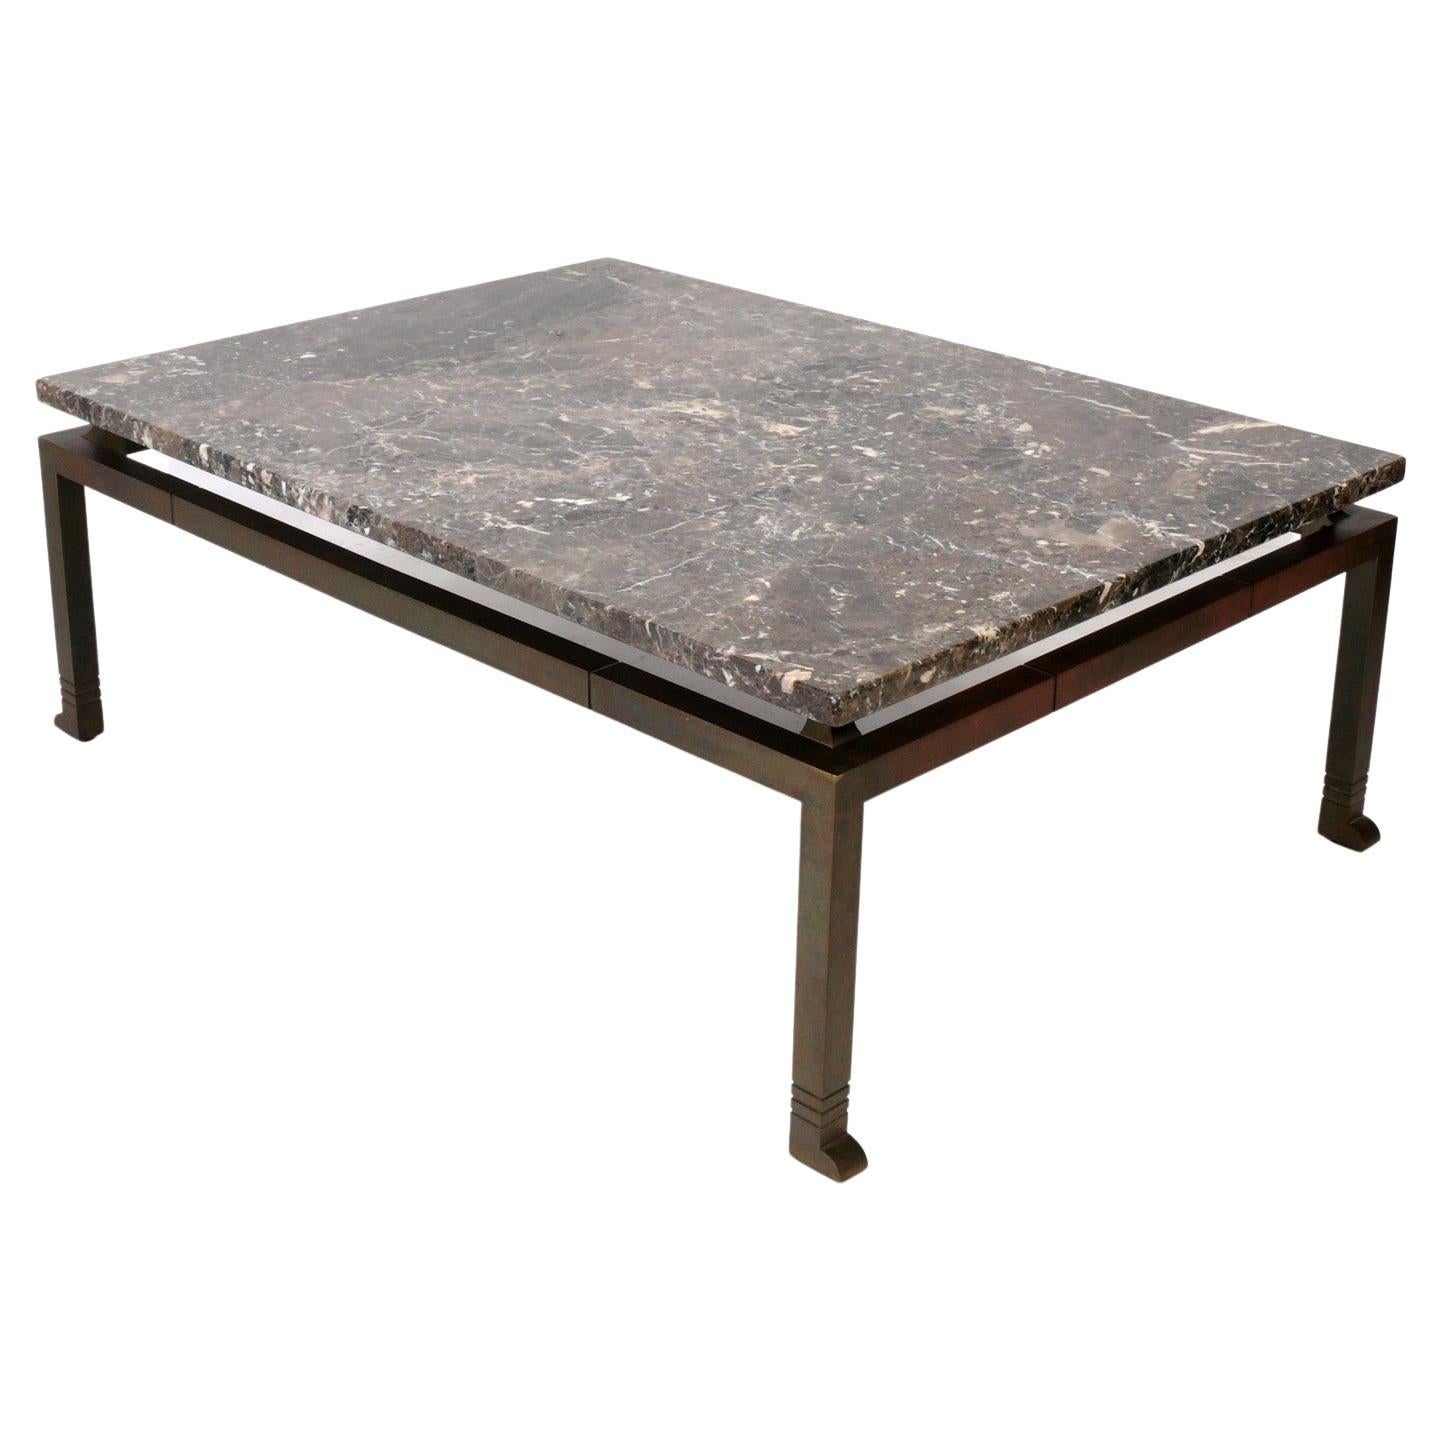 Large Scale Marble and Bronze Coffee Table in the manner of Marc du Plantier